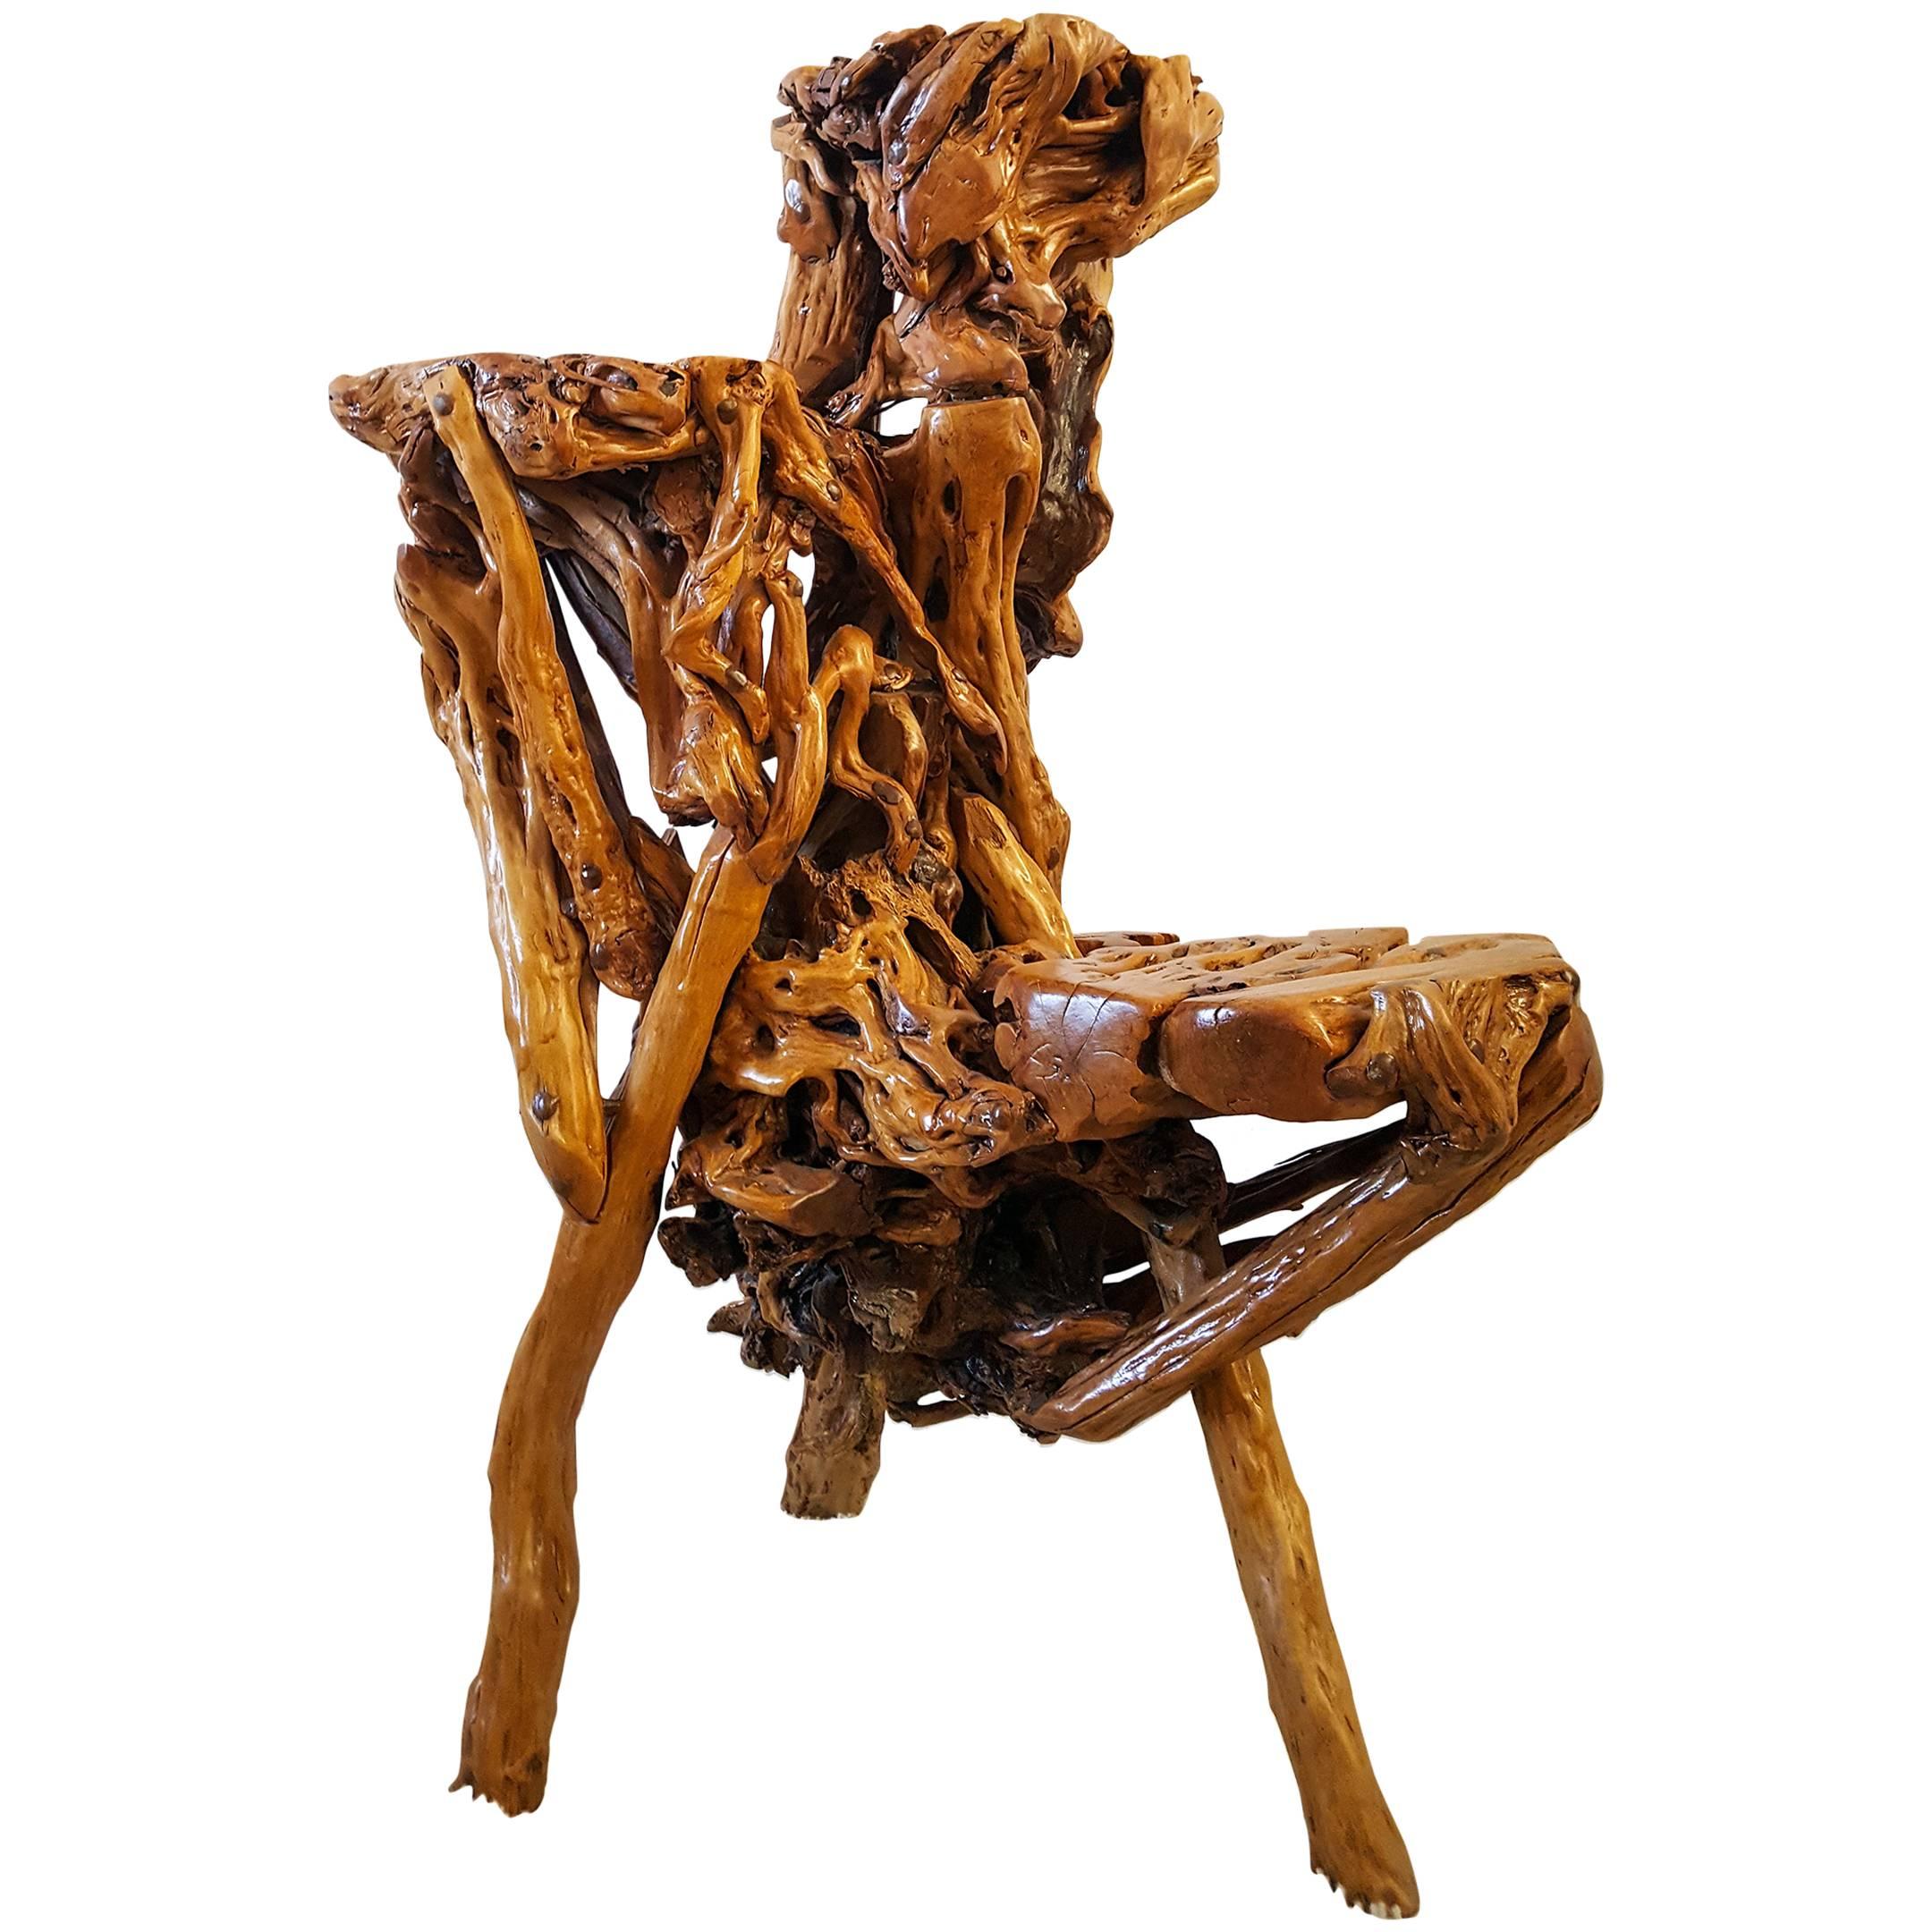 Chinese Sculptural Three-Tiered Root Wood Table